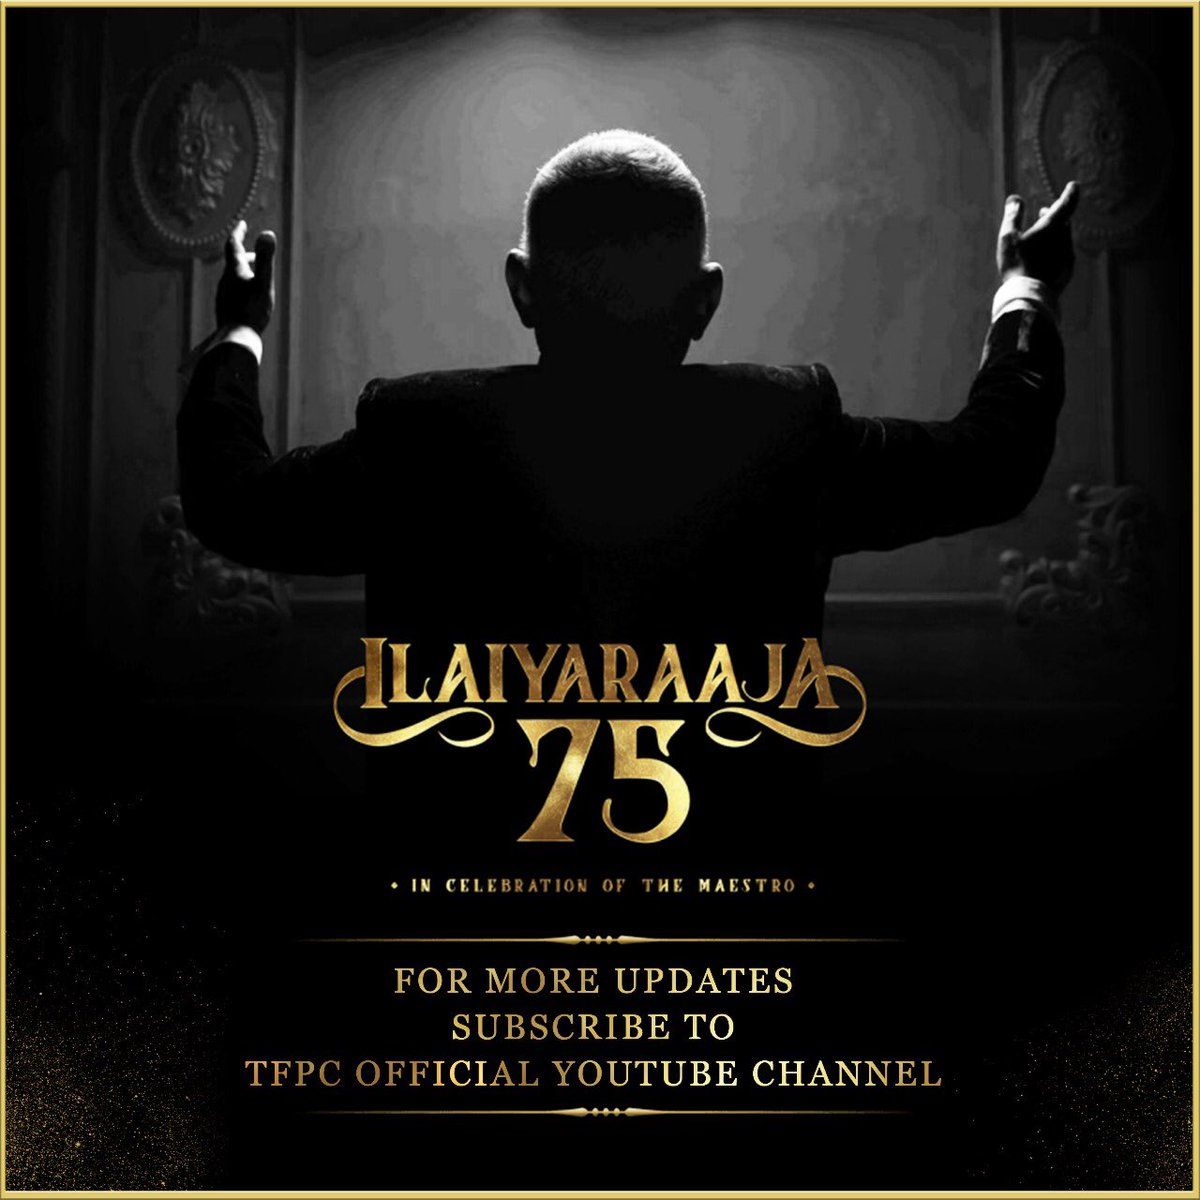 AR Rahman to attend Ilaiyaraaja 75 event which is set to happen